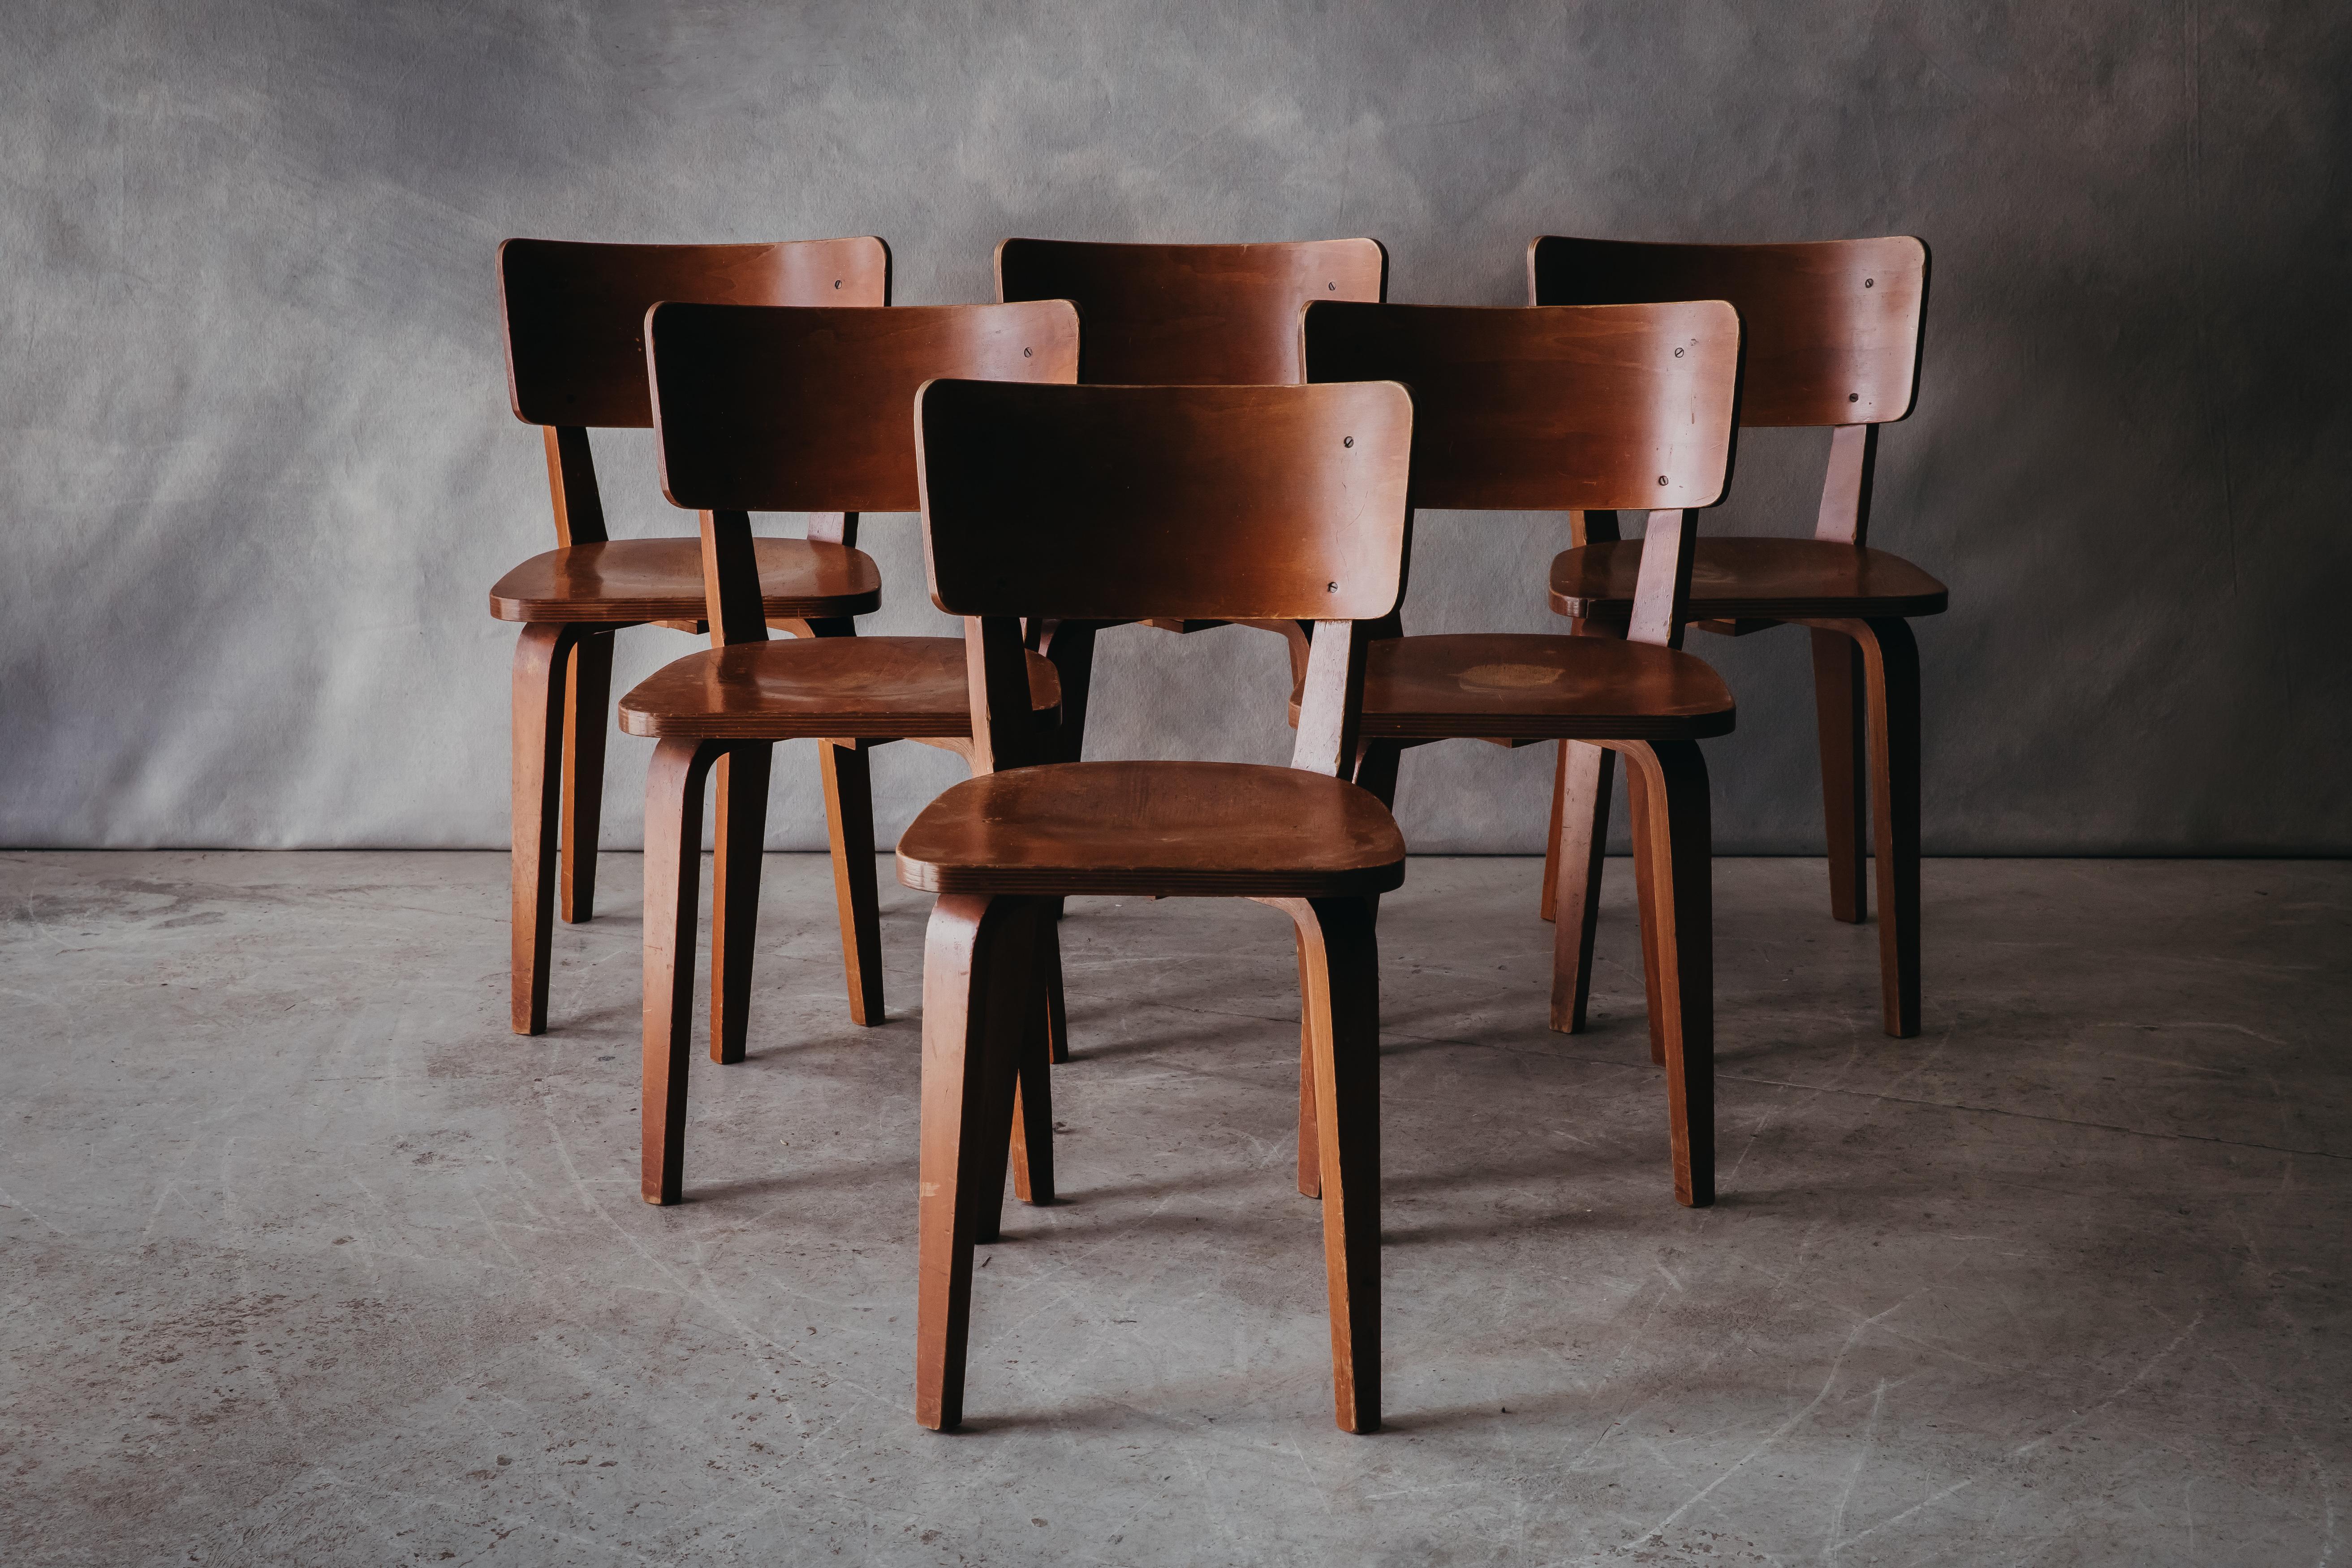 Vintage Set Of Bentwood Dining Chairs From France, circa 1950. Nice models in the manner of Thonet. Nice wear and use.